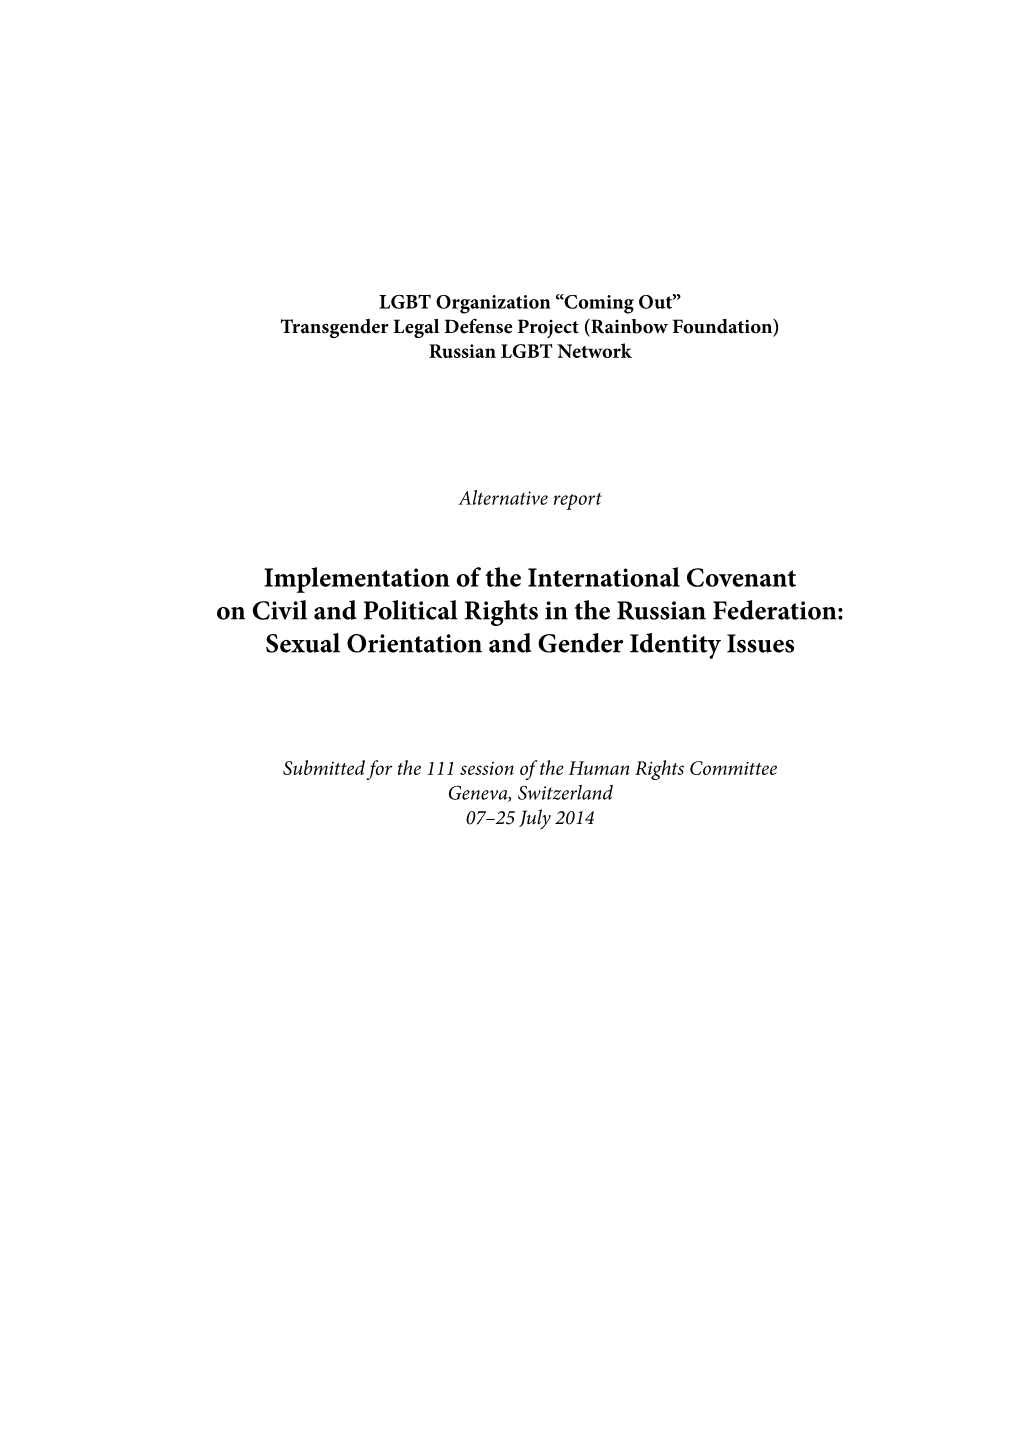 International Covenant on Civil and Political Rights in the Russian Federation: Sexual Orientation and Gender Identity Issues